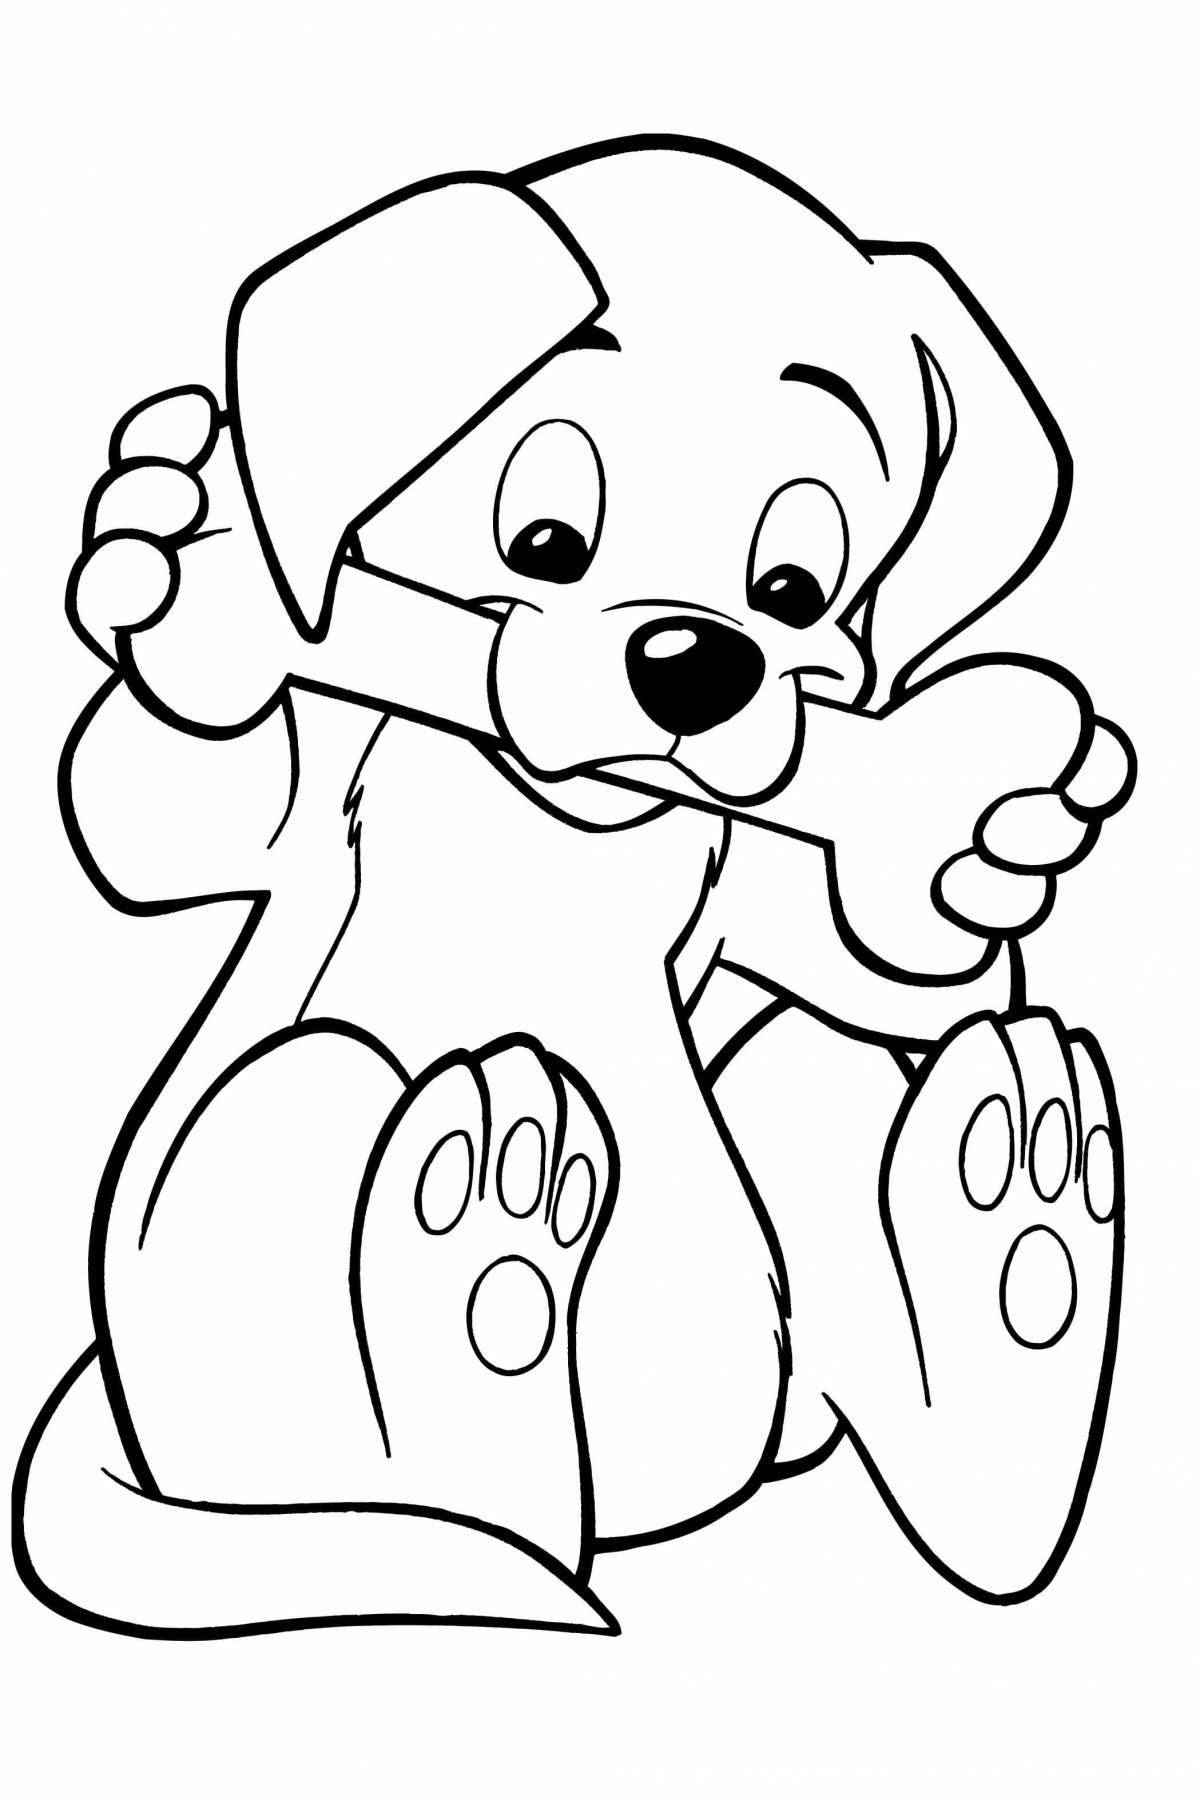 Curious dog coloring for kids